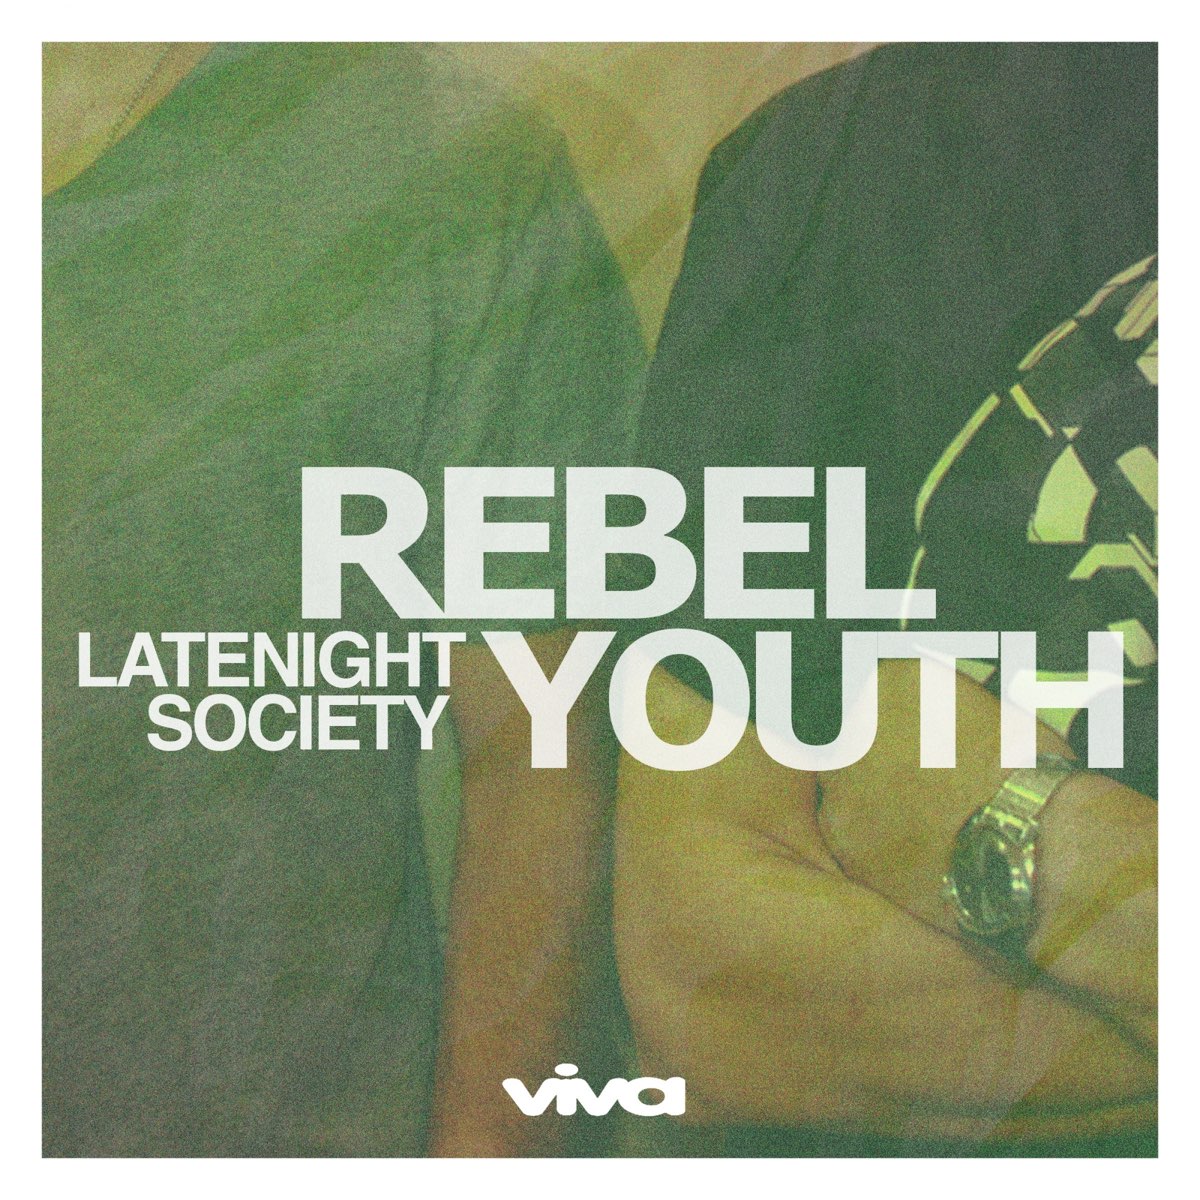 Rebel Youth Sphera. The Rebel Youth Exclusive registered перевод.